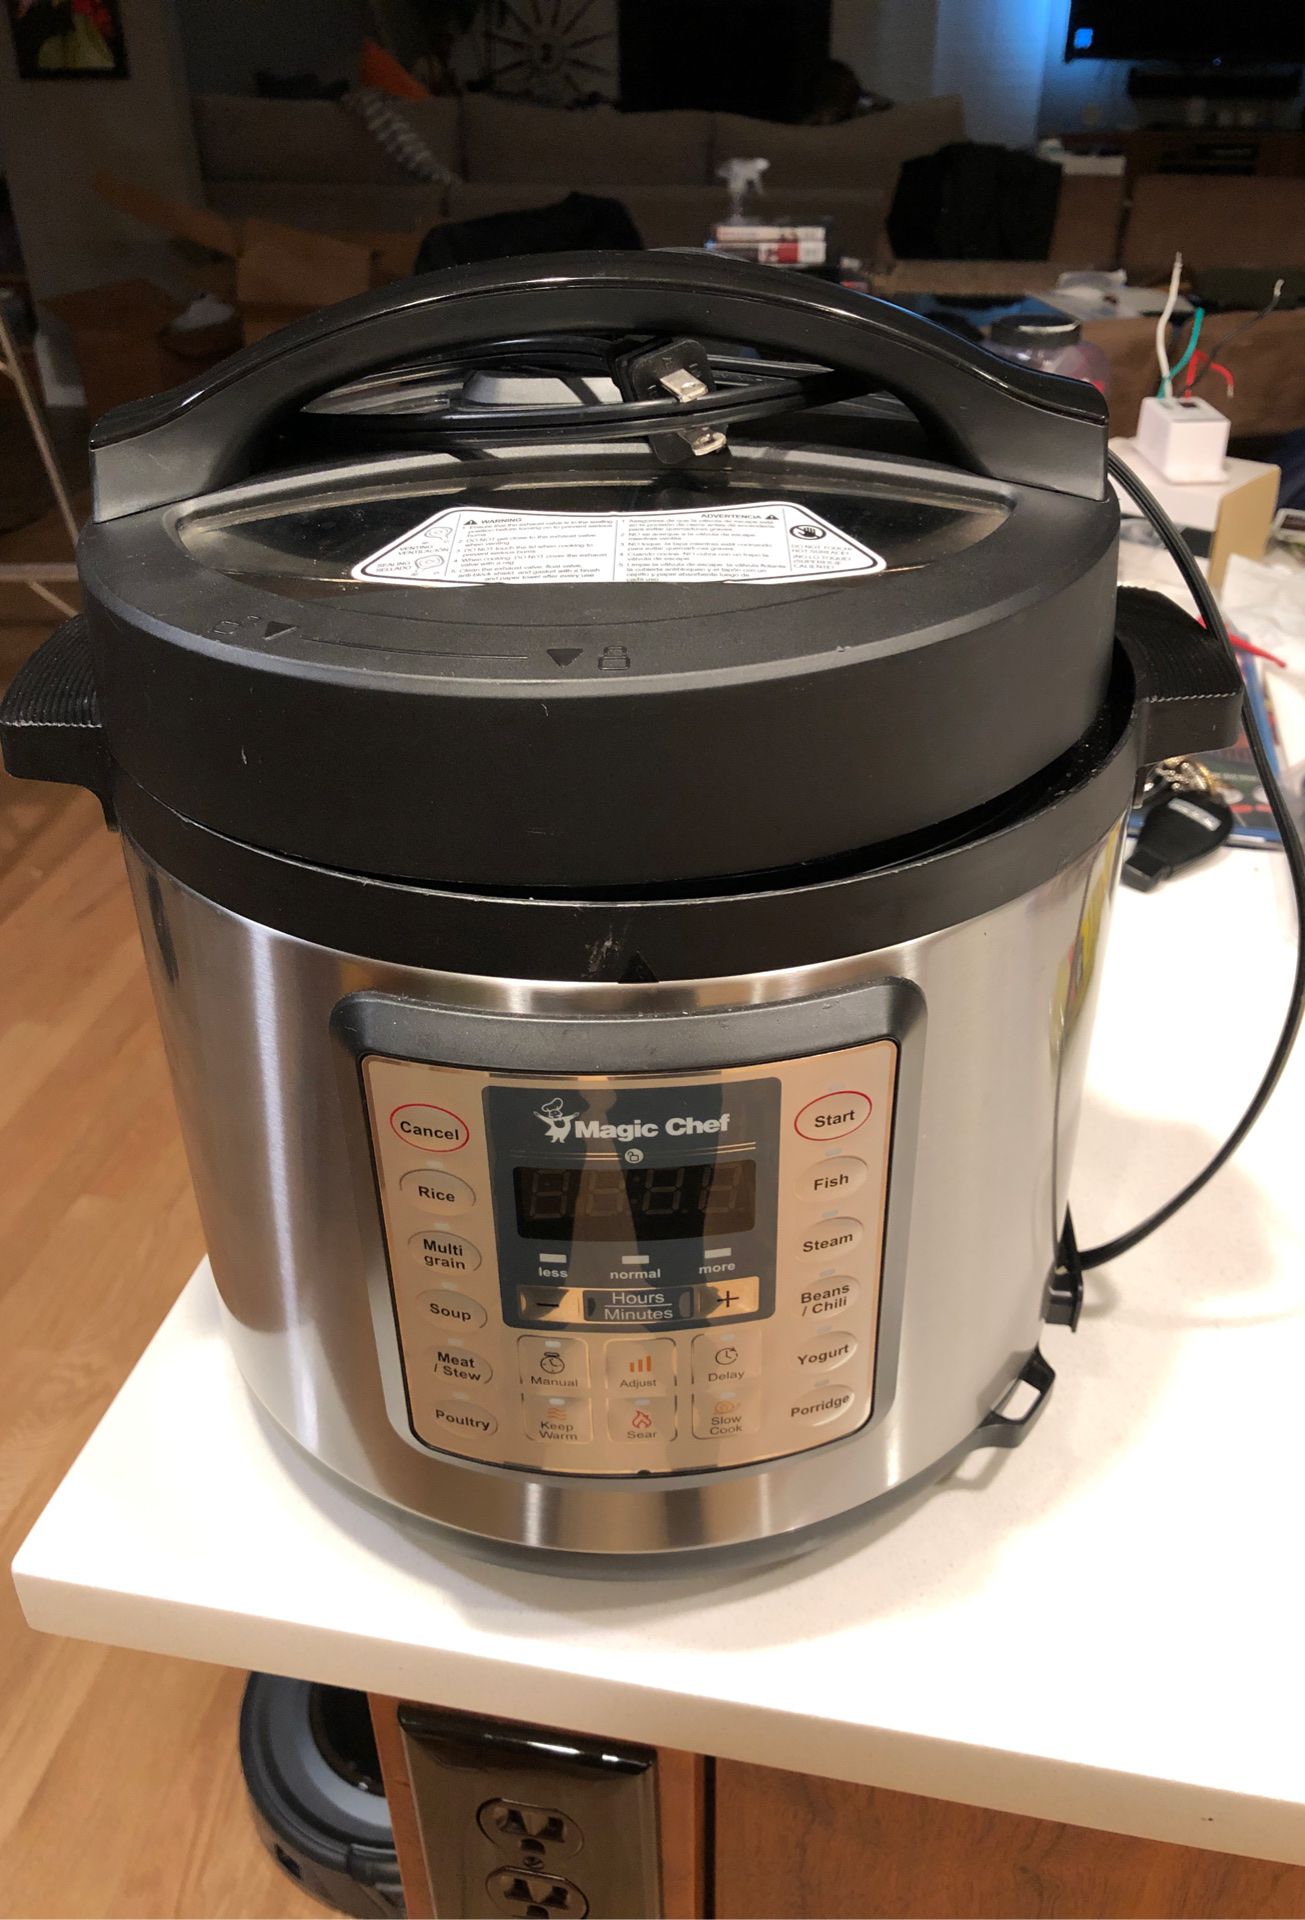 Magic Chef 6 Qt. Stainless All-in-One Multi-Cooker. Price Reduced!